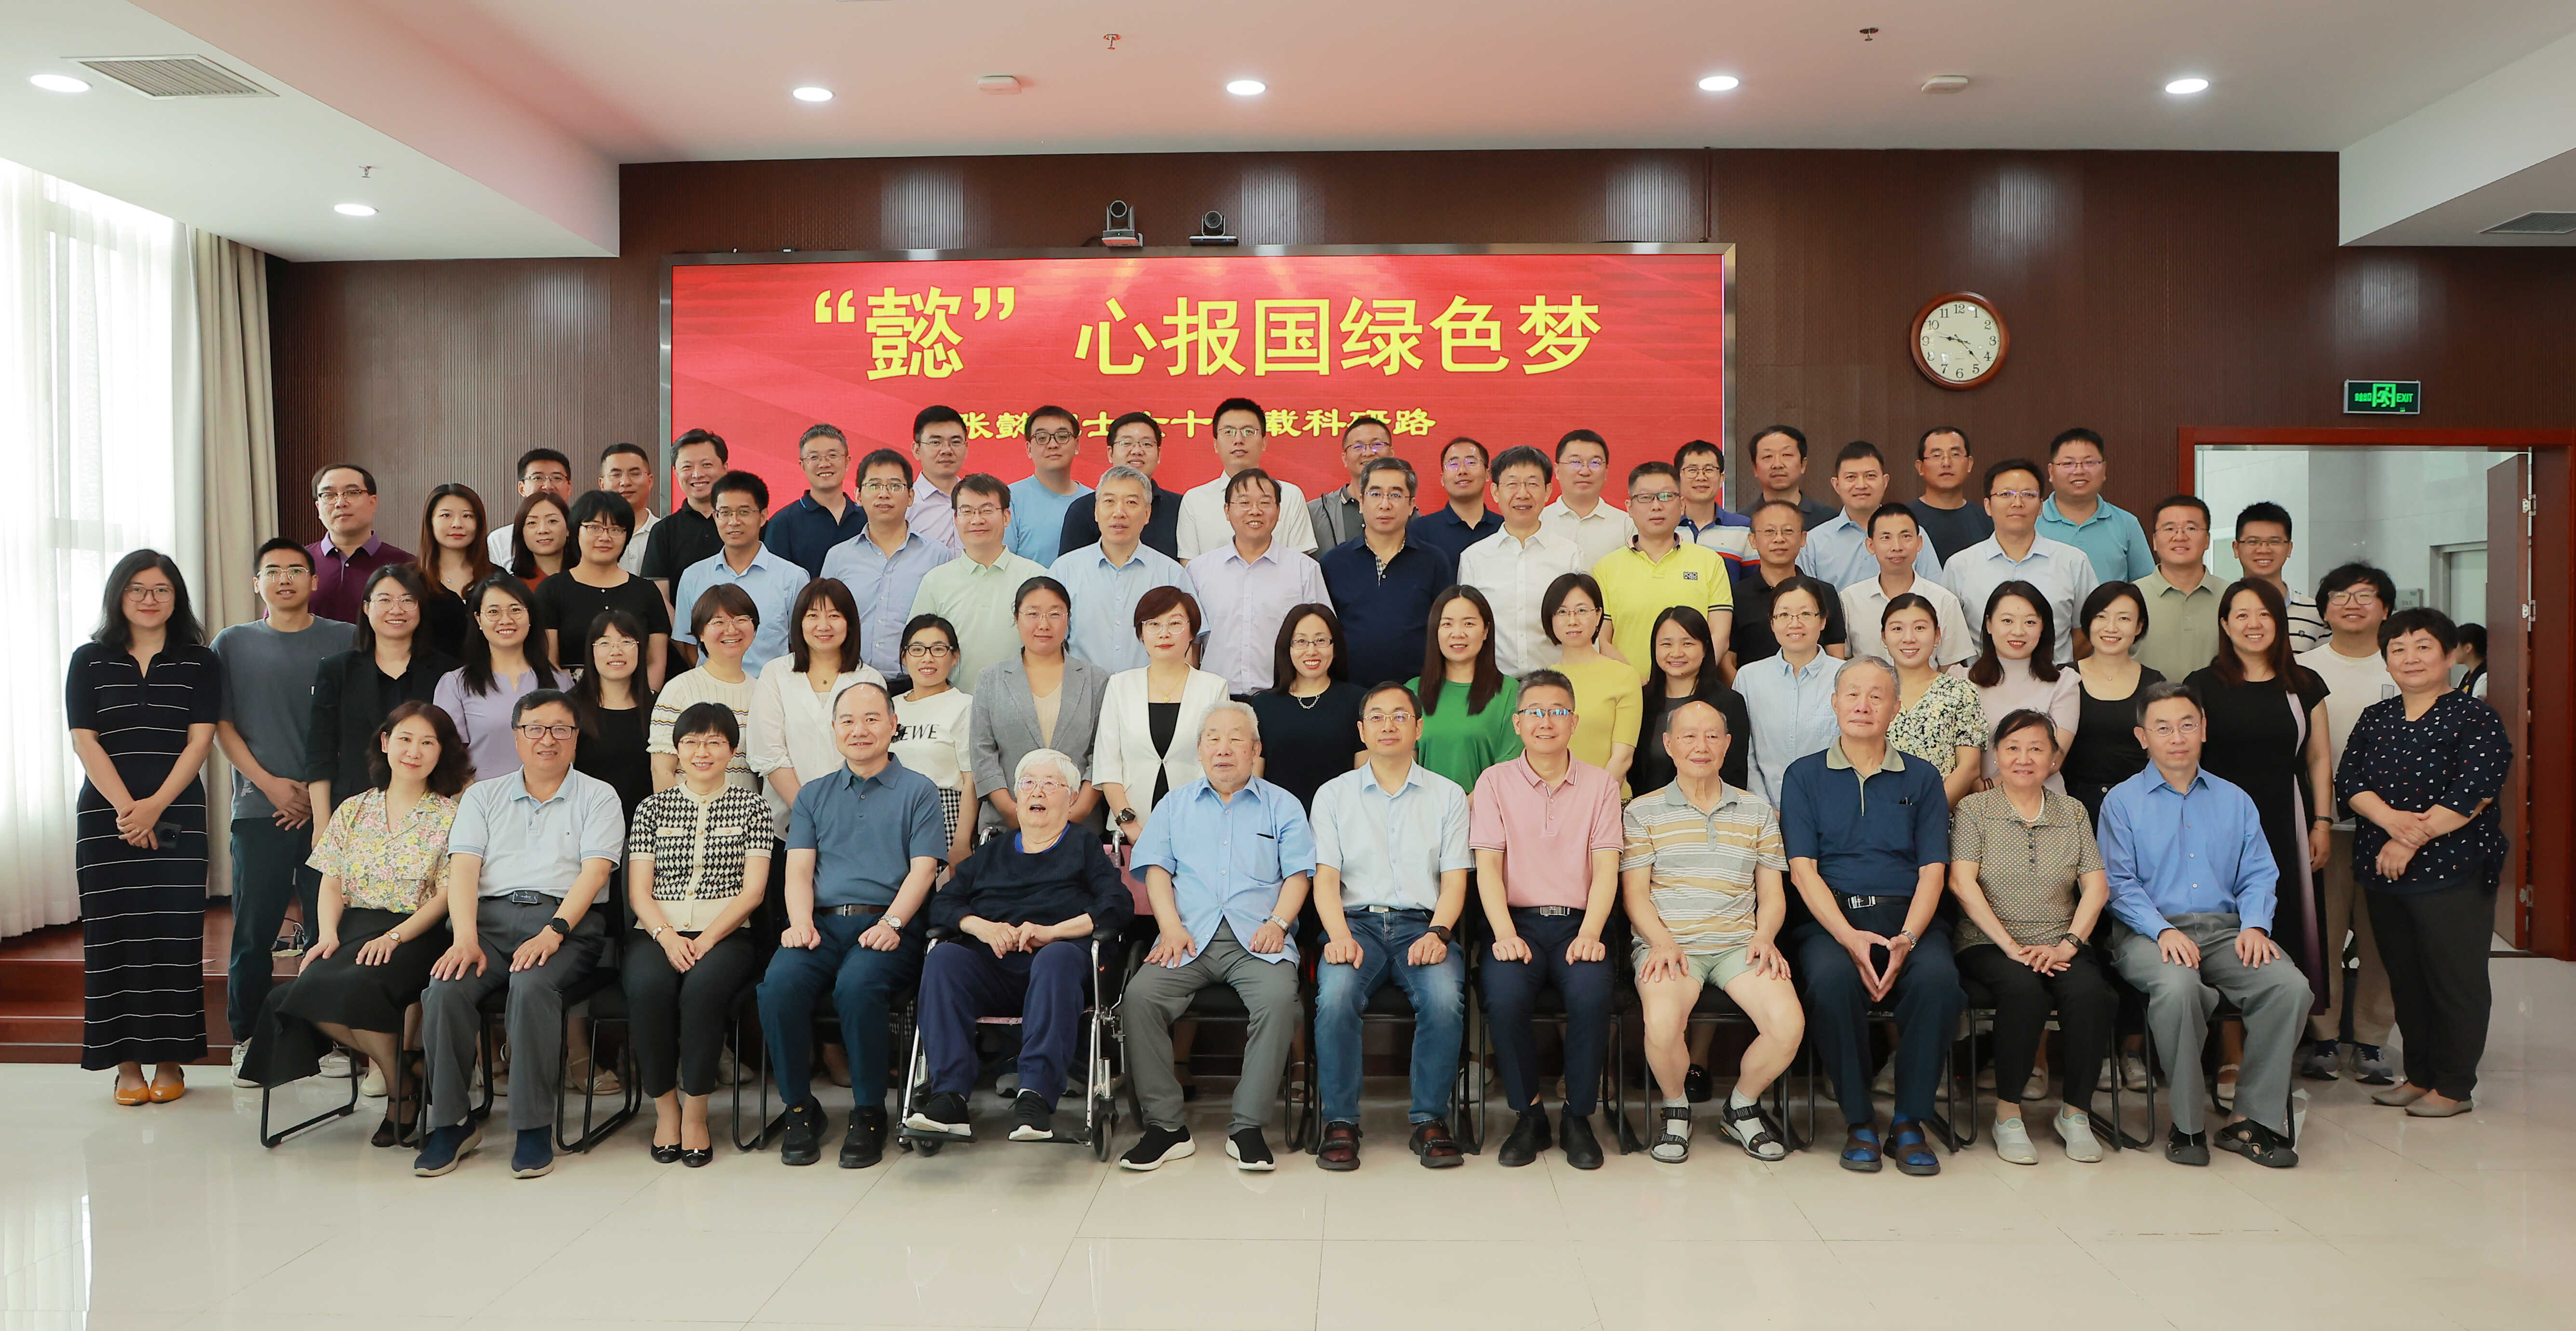  "Virtuous" Heart Serving the Country and Green Dream -- The Institute of Process Engineering held a seminar on Academician Zhang Yi's academic growth data collection project